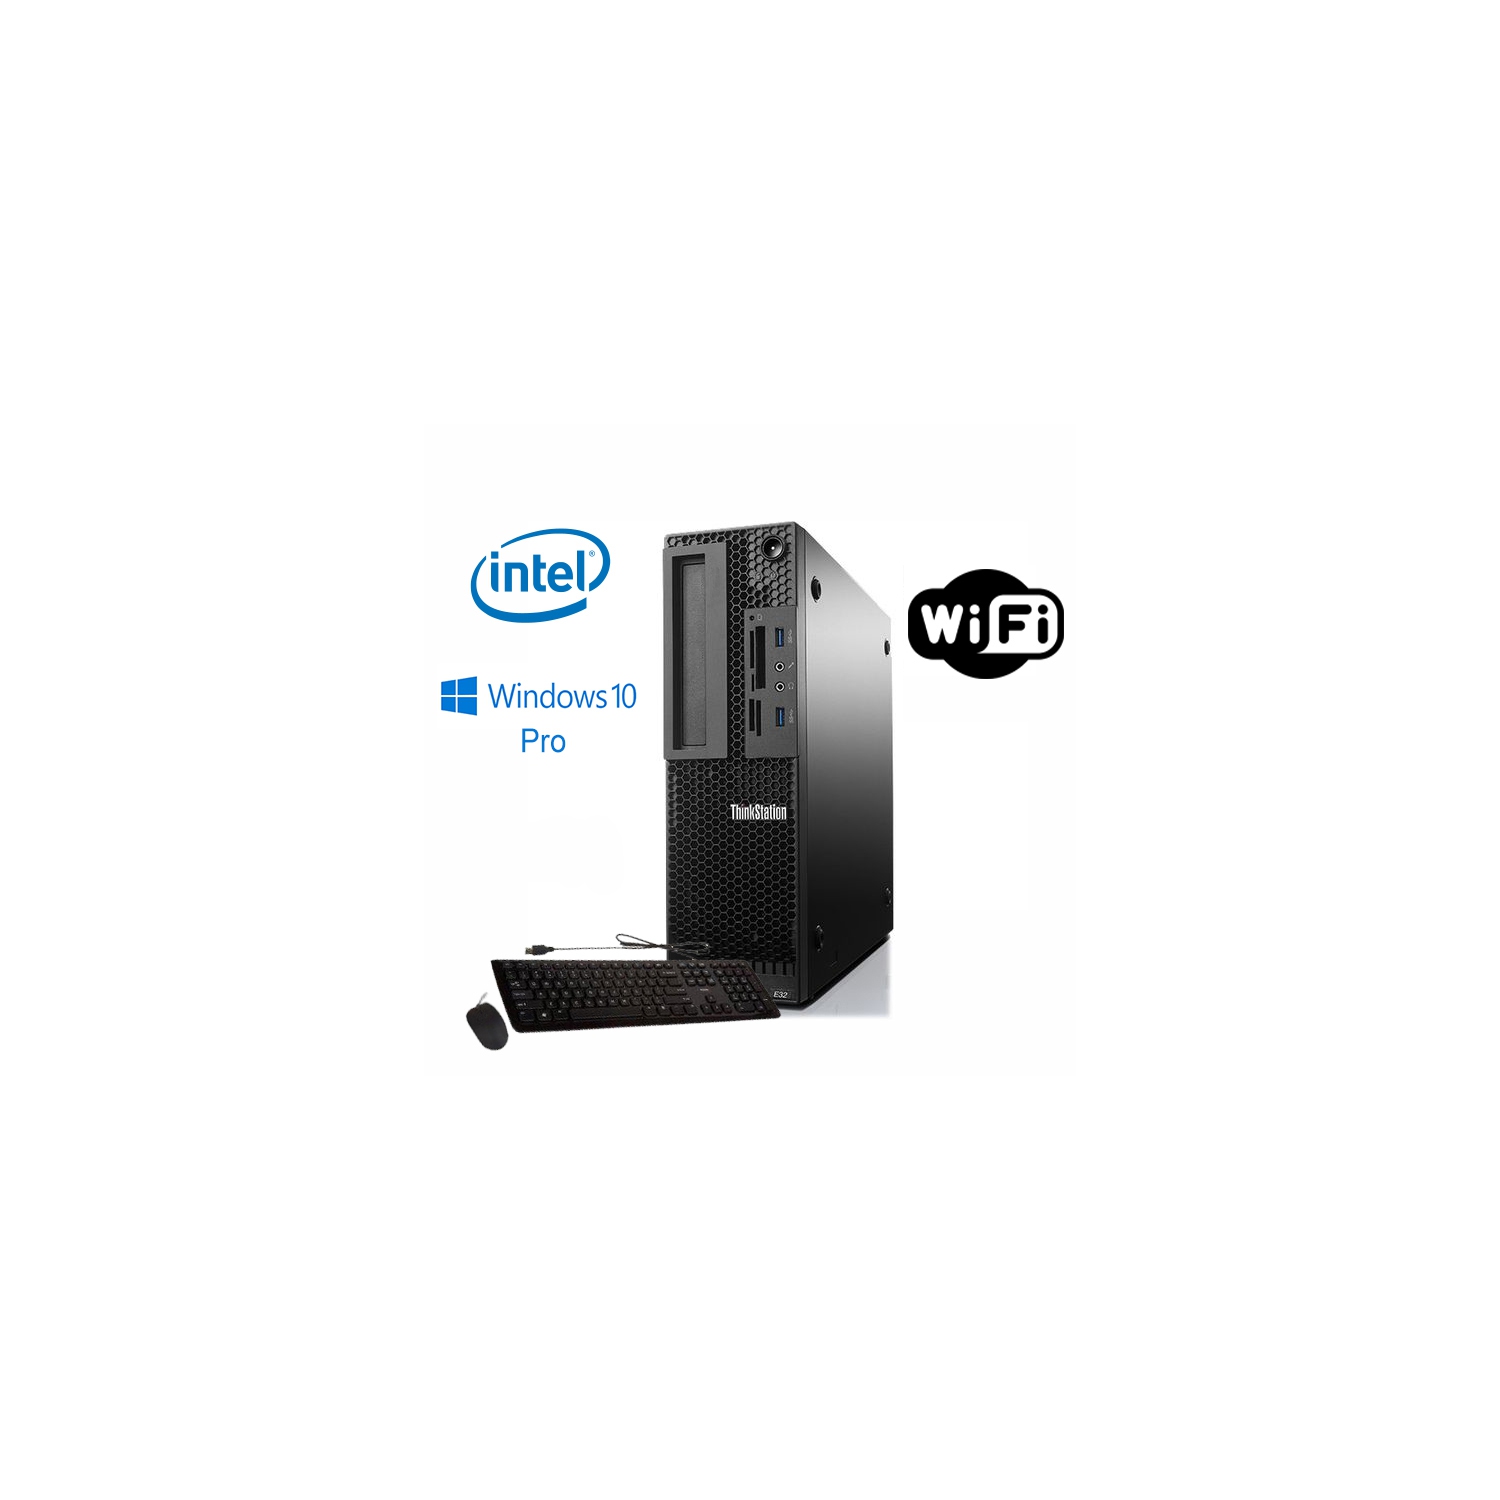 Lenovo ThinkCentre M800 Small Form Factor Desktop PC DVD 16G DDR4 Intel Quad Core i5 6500 up to 3.6GHz Win 10 Pro 64-Multi-Language Support English/Spanish/French 3T Renewed WiFi BT 4.0